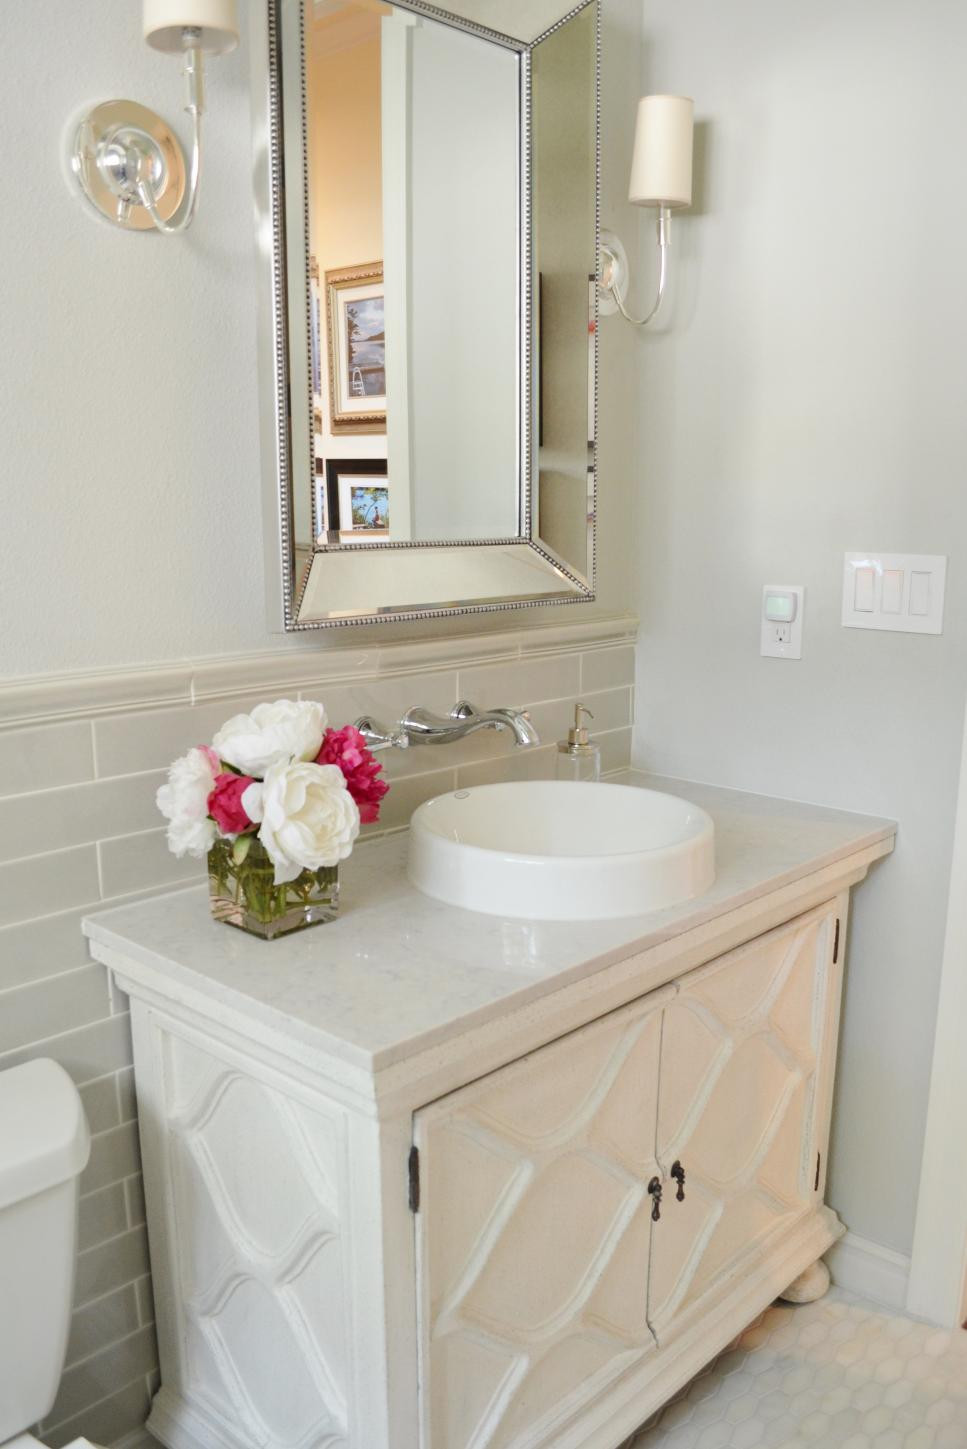 Budget Bathroom Remodeling Inspirational How Much Bud Bathroom Remodel You Need Home and Gardens